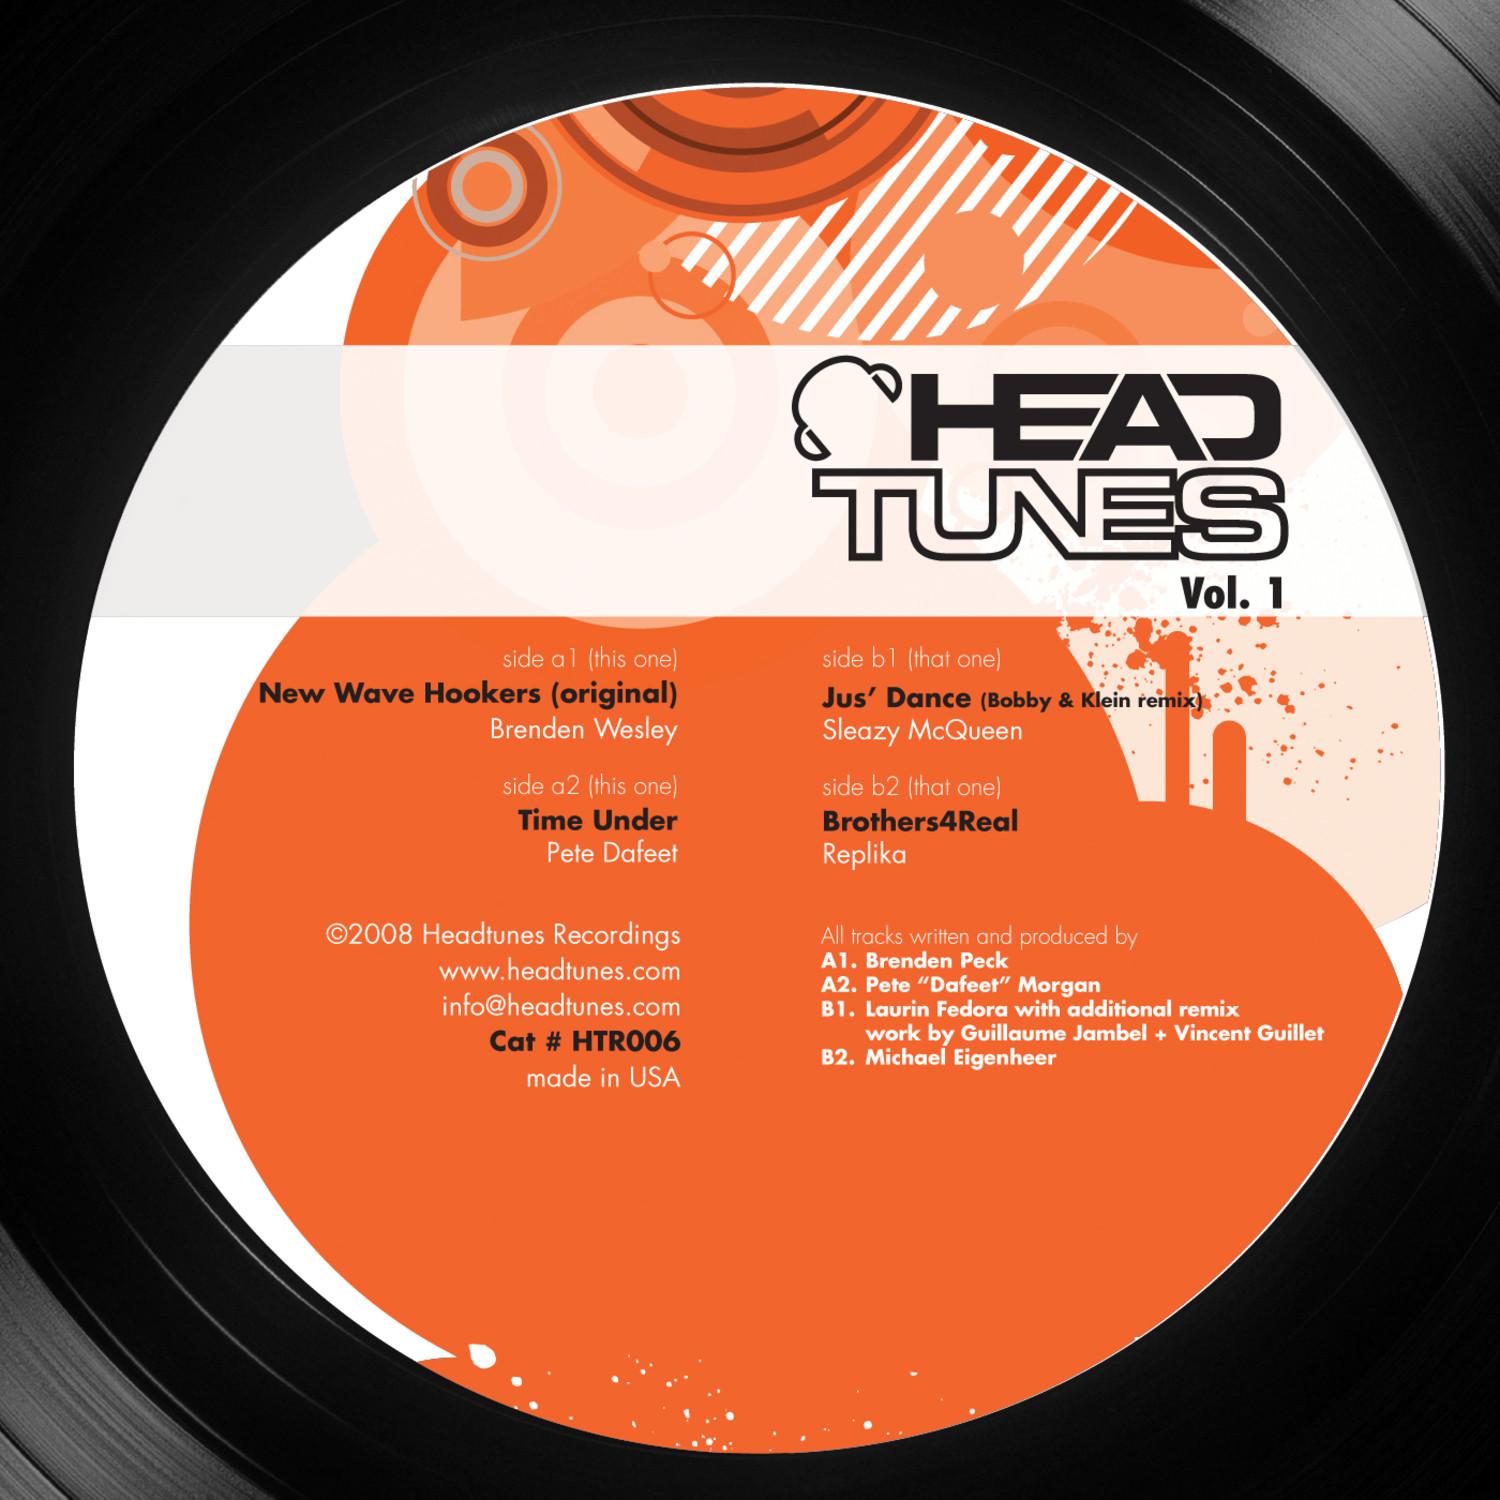 This is Headtunes Vol 1